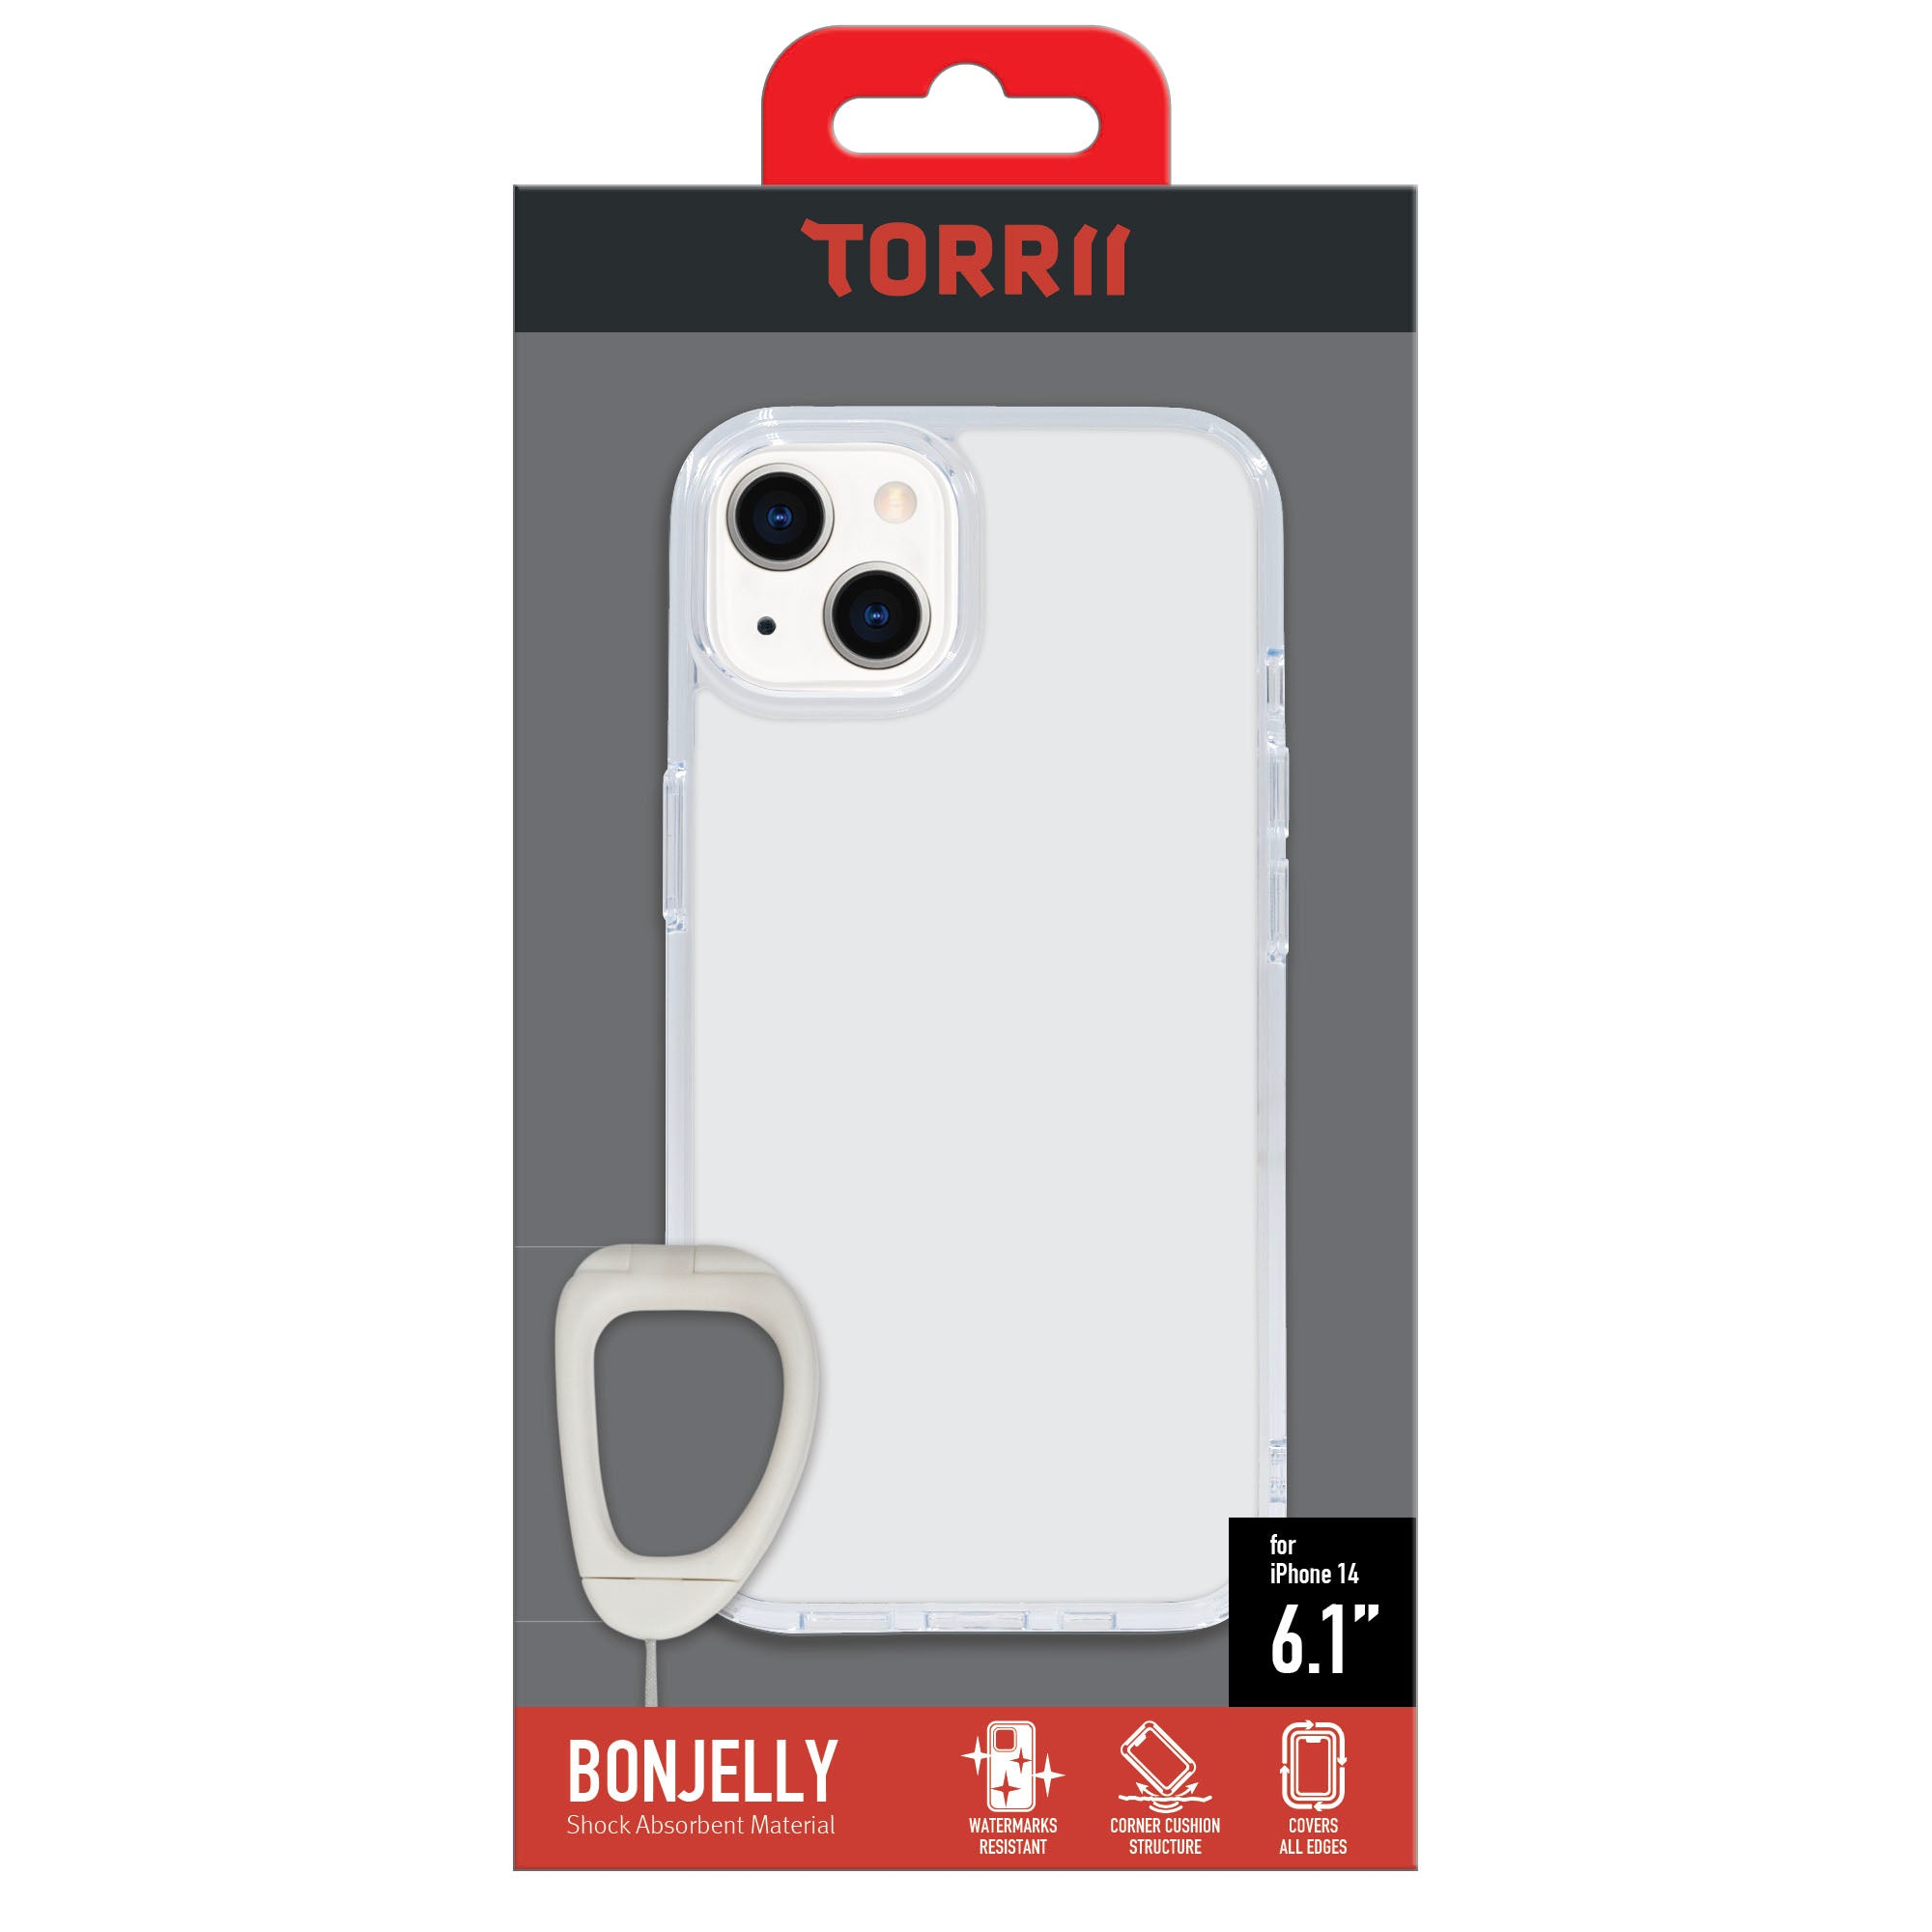 Torrii Bonjelly Case Anti-Bacterial Coating For iPhone 14 - Clear